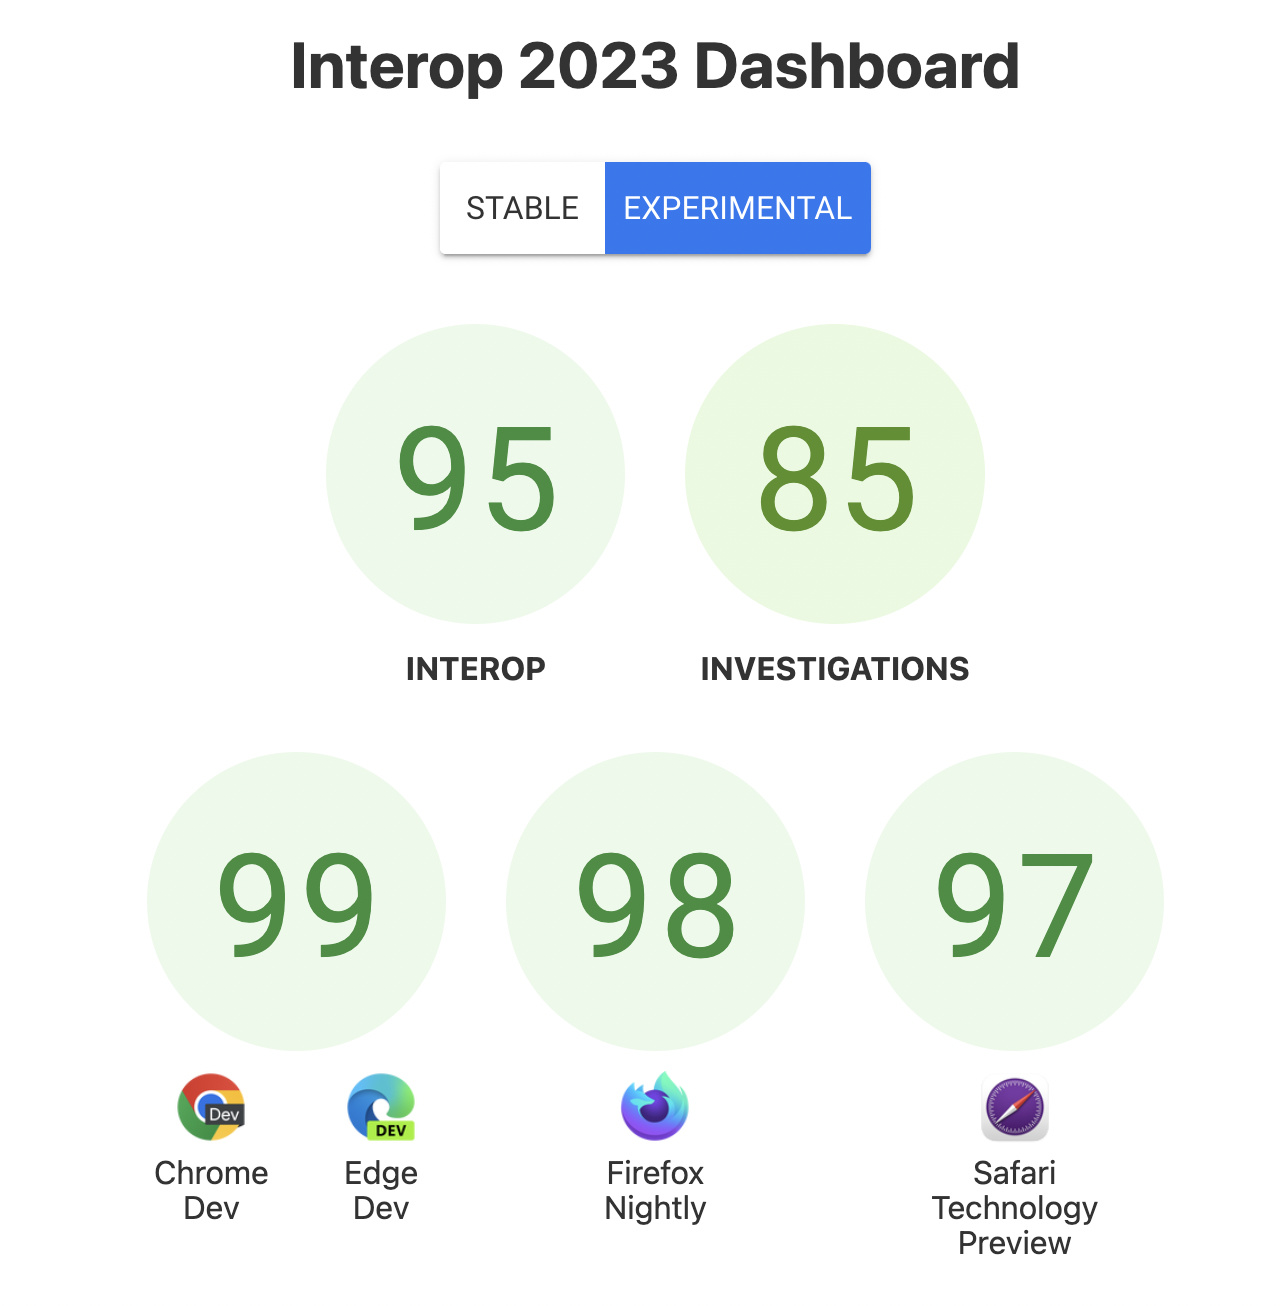 Interop 2023 dashboard. two buttons labelled stable and experimental (blue) a series of green buttons filled iwth numbers and labelled below are as follows: 95 - interop, 85 - investigations, 99 -- chrome/edge dev, 97 - firefox nightly, 98 - safari technology review